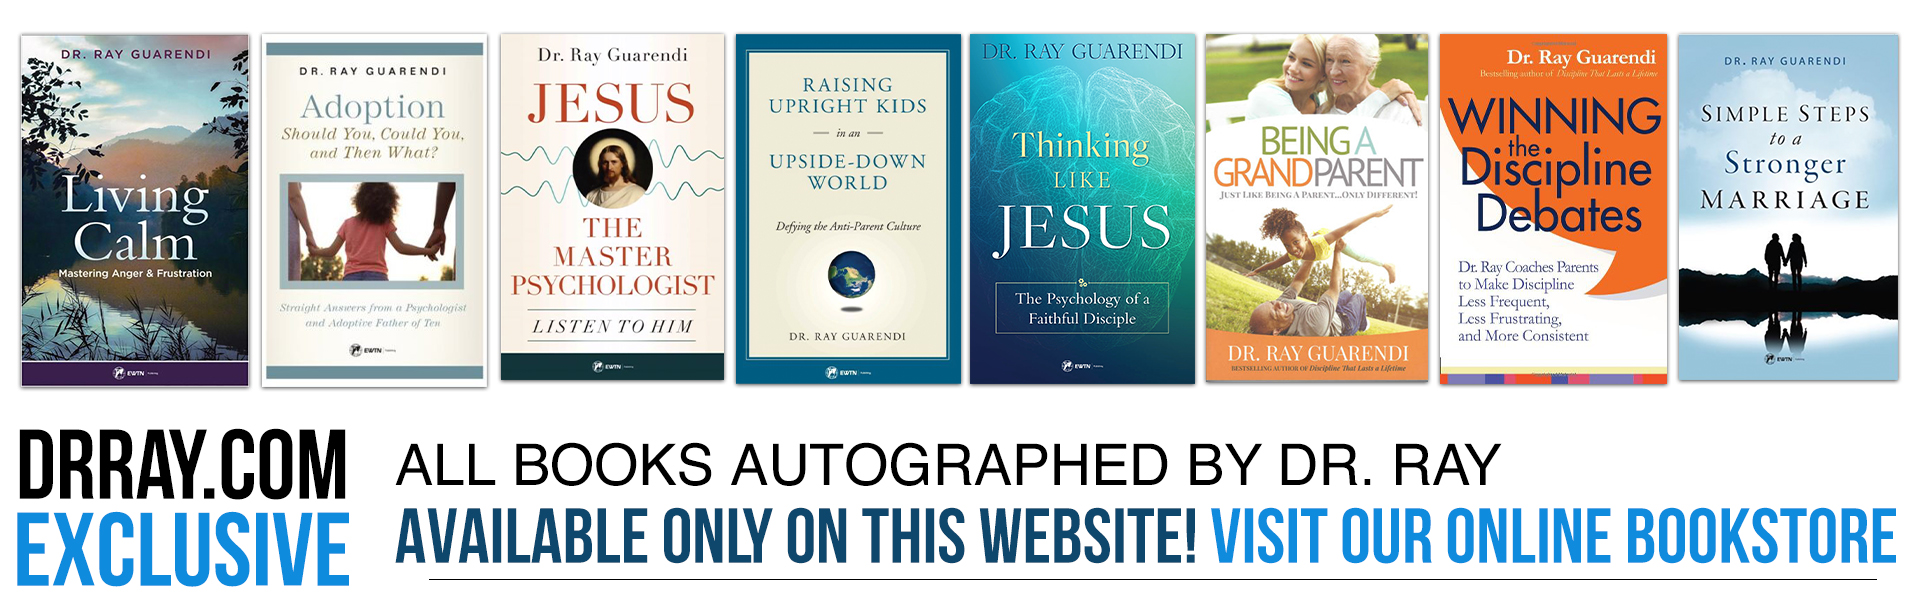 DrRay.com Exclusive: All books autographed by Dr. Ray available only on this website! Visit our online bookstore.